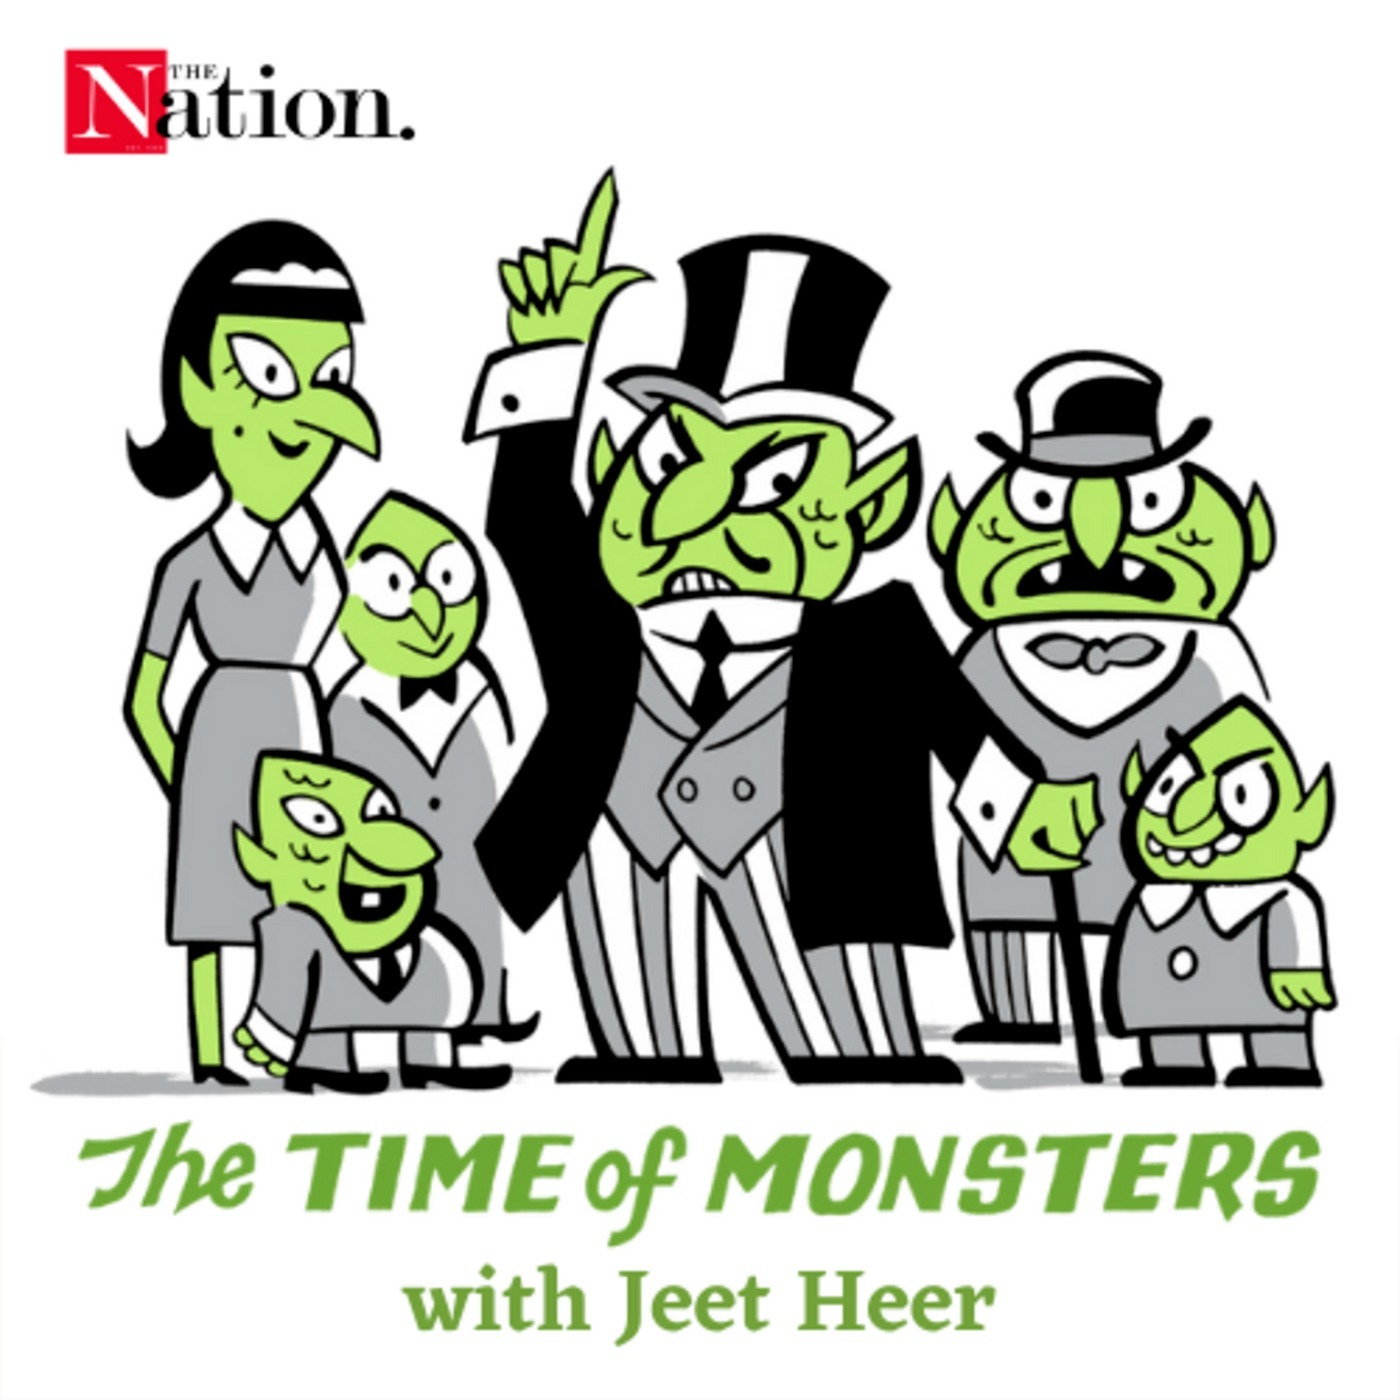 Time of Monsters: A Corrupt Court Faces No Accountability